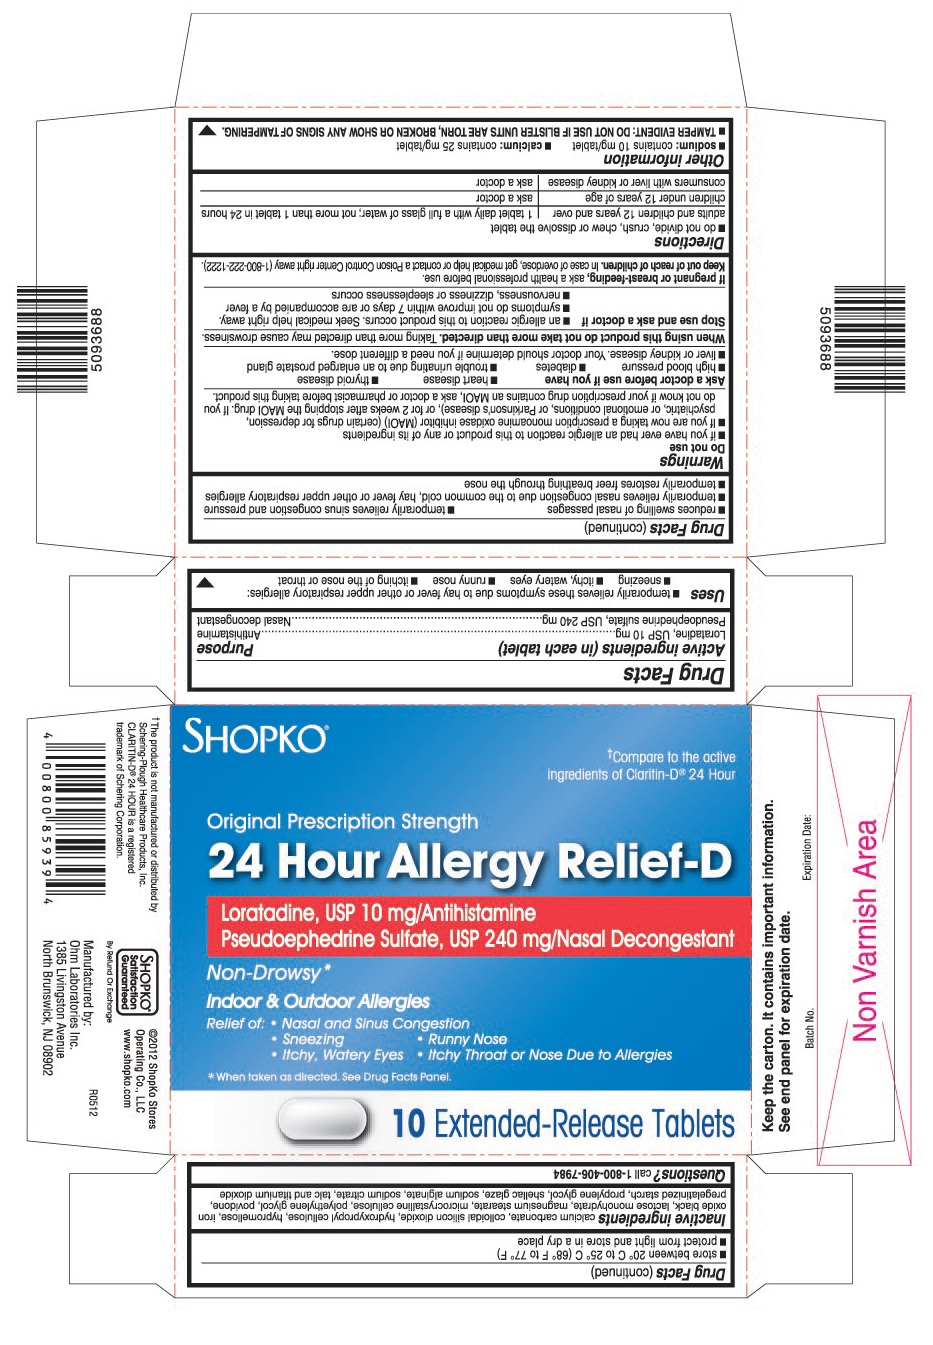 This is the 10 count blister carton label for Shopko Loratadine D extended-release tablets.